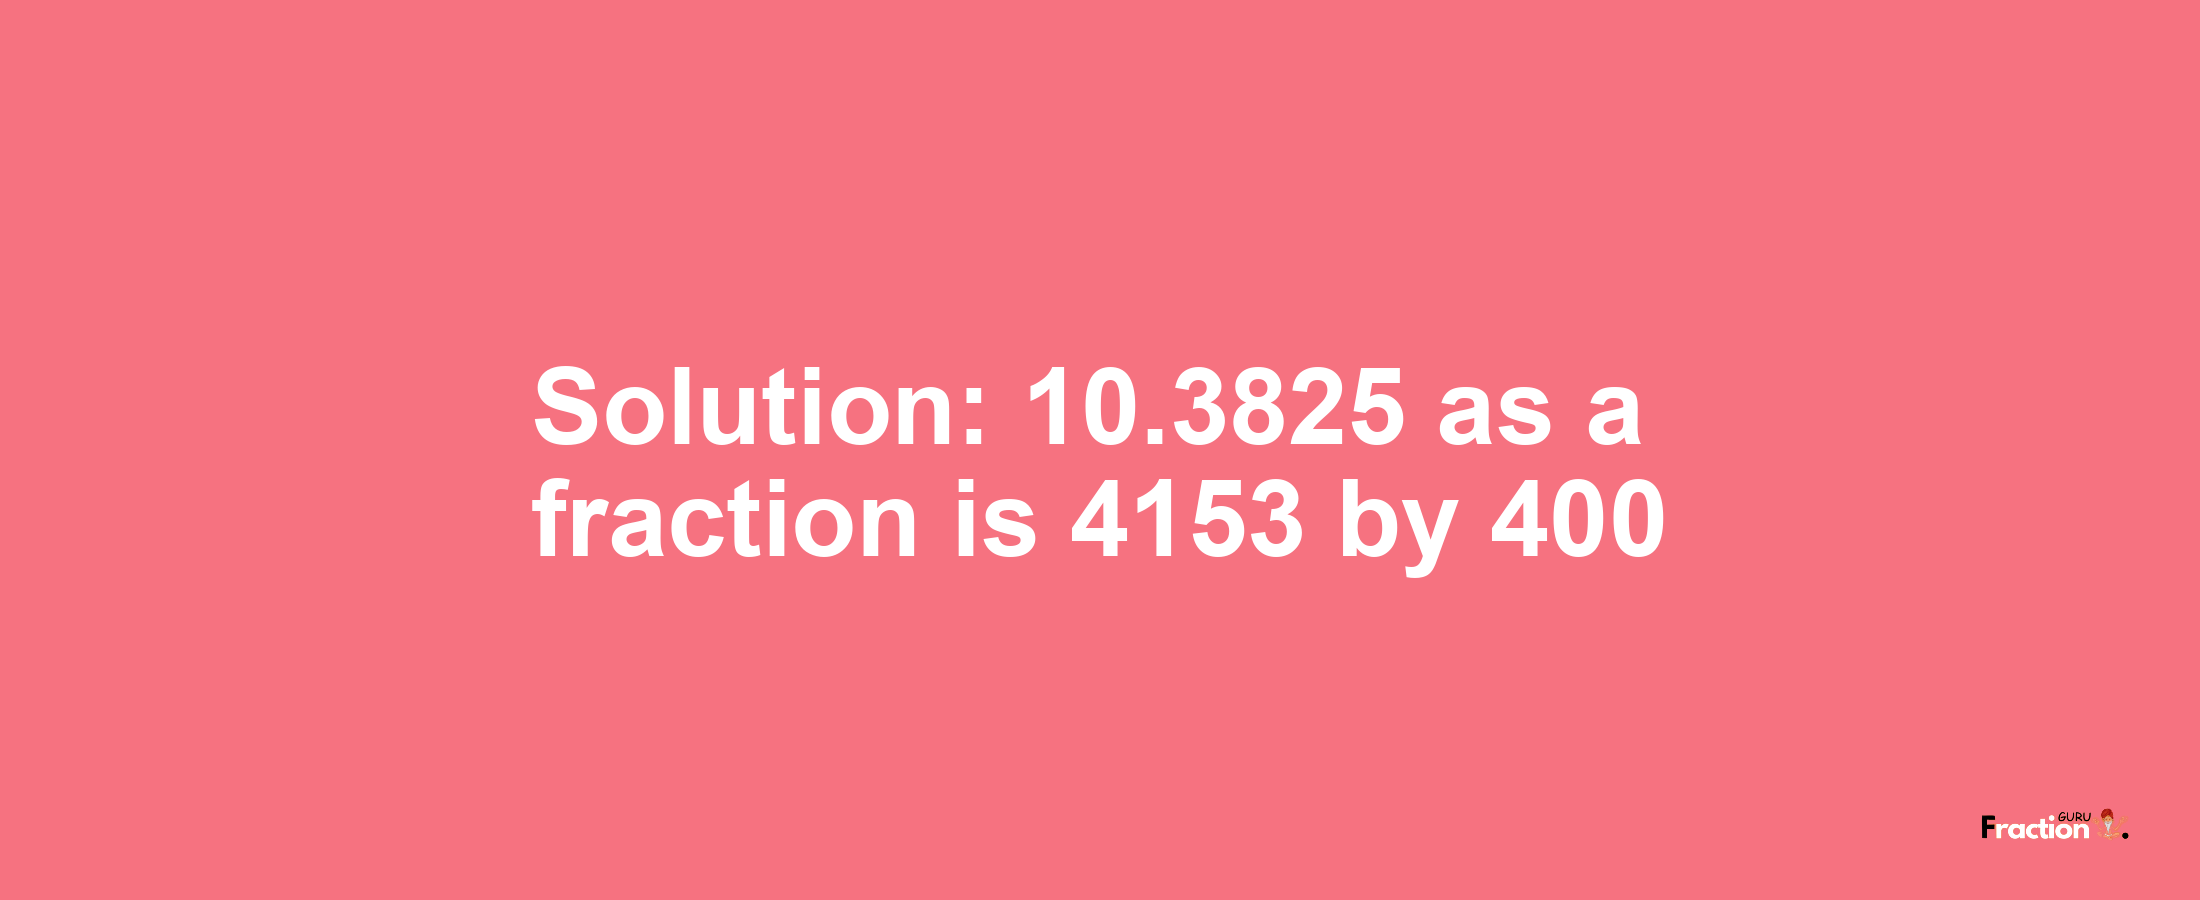 Solution:10.3825 as a fraction is 4153/400